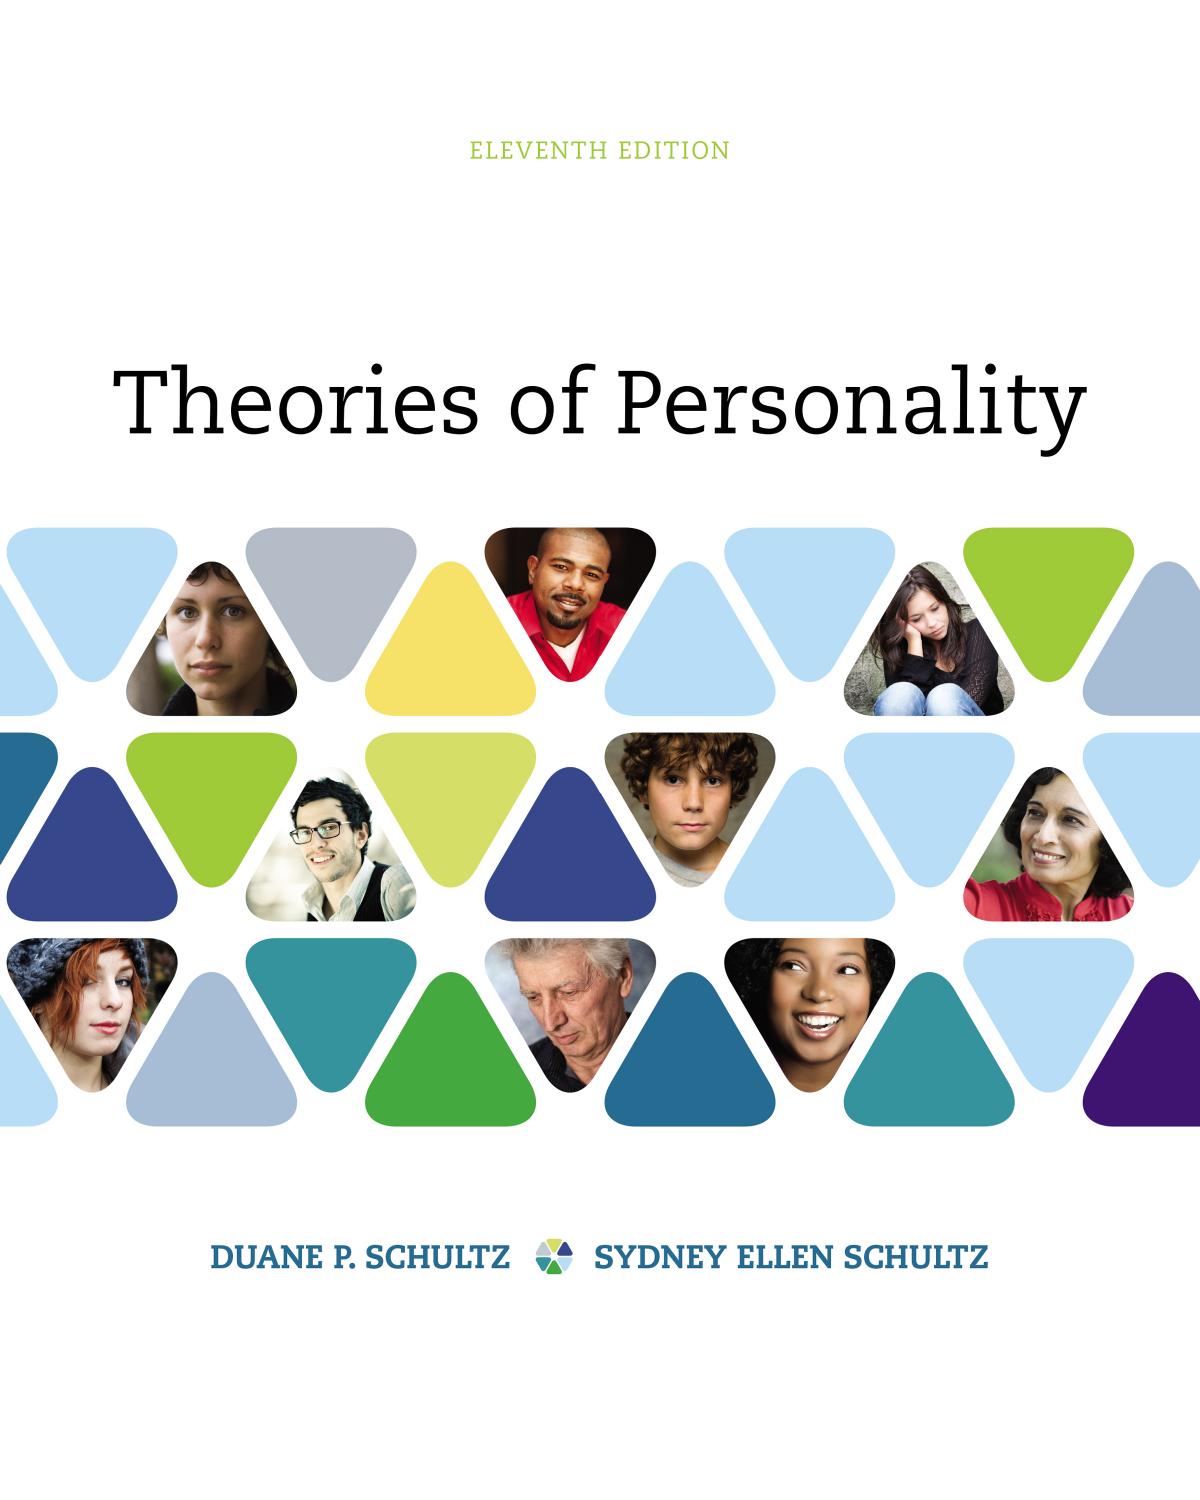 Theories of Personality 11th Edition by Duane P. Schultz.jpg